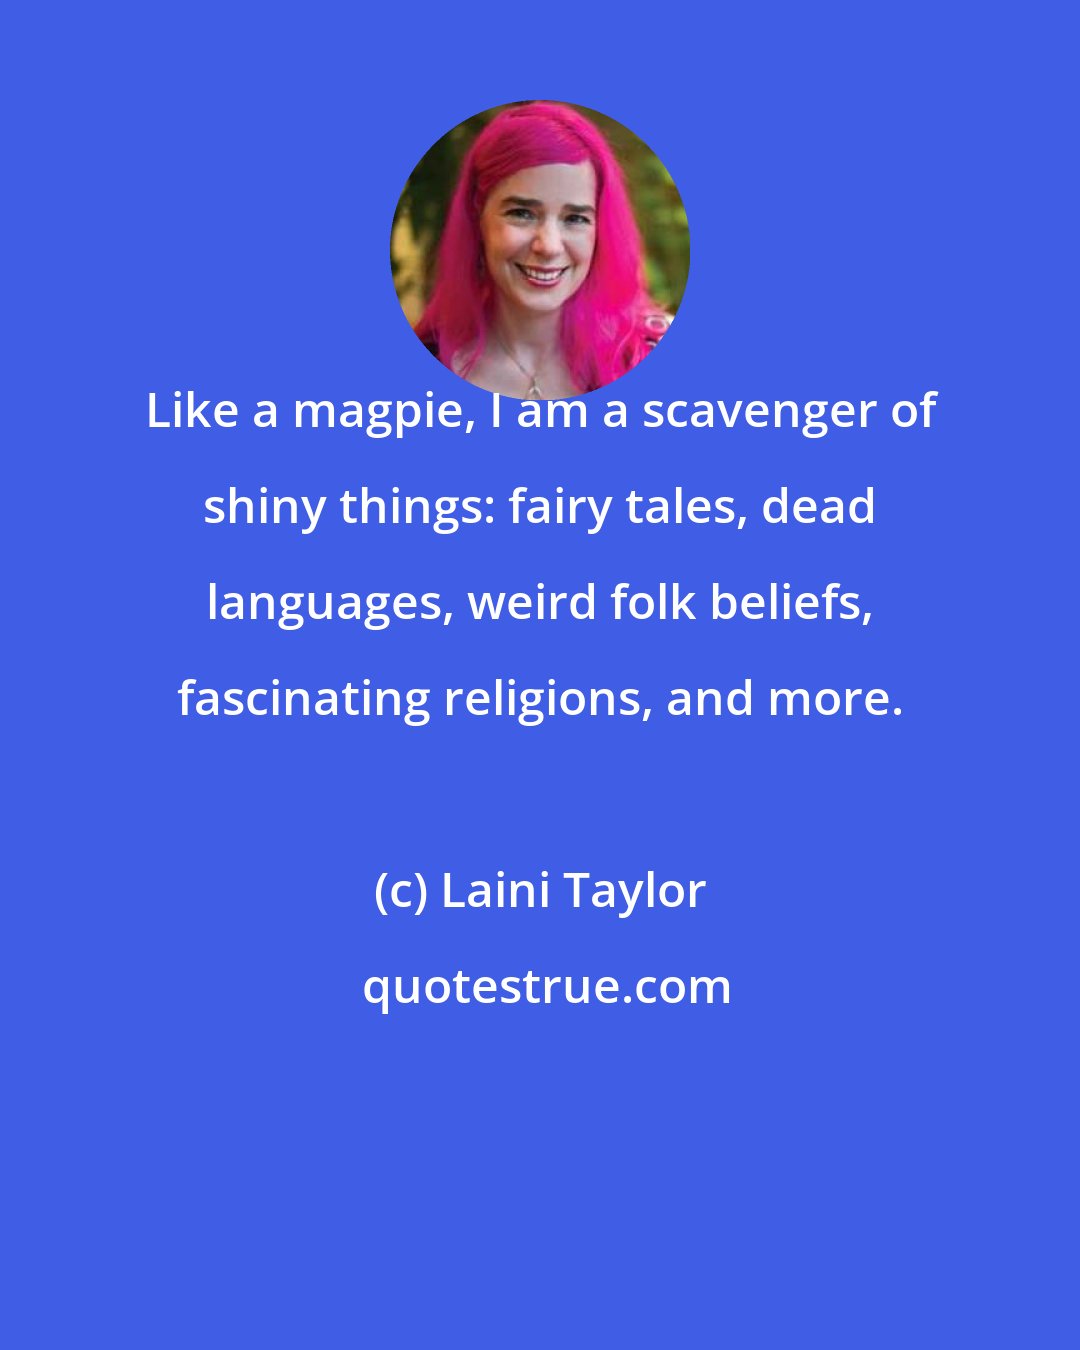 Laini Taylor: Like a magpie, I am a scavenger of shiny things: fairy tales, dead languages, weird folk beliefs, fascinating religions, and more.